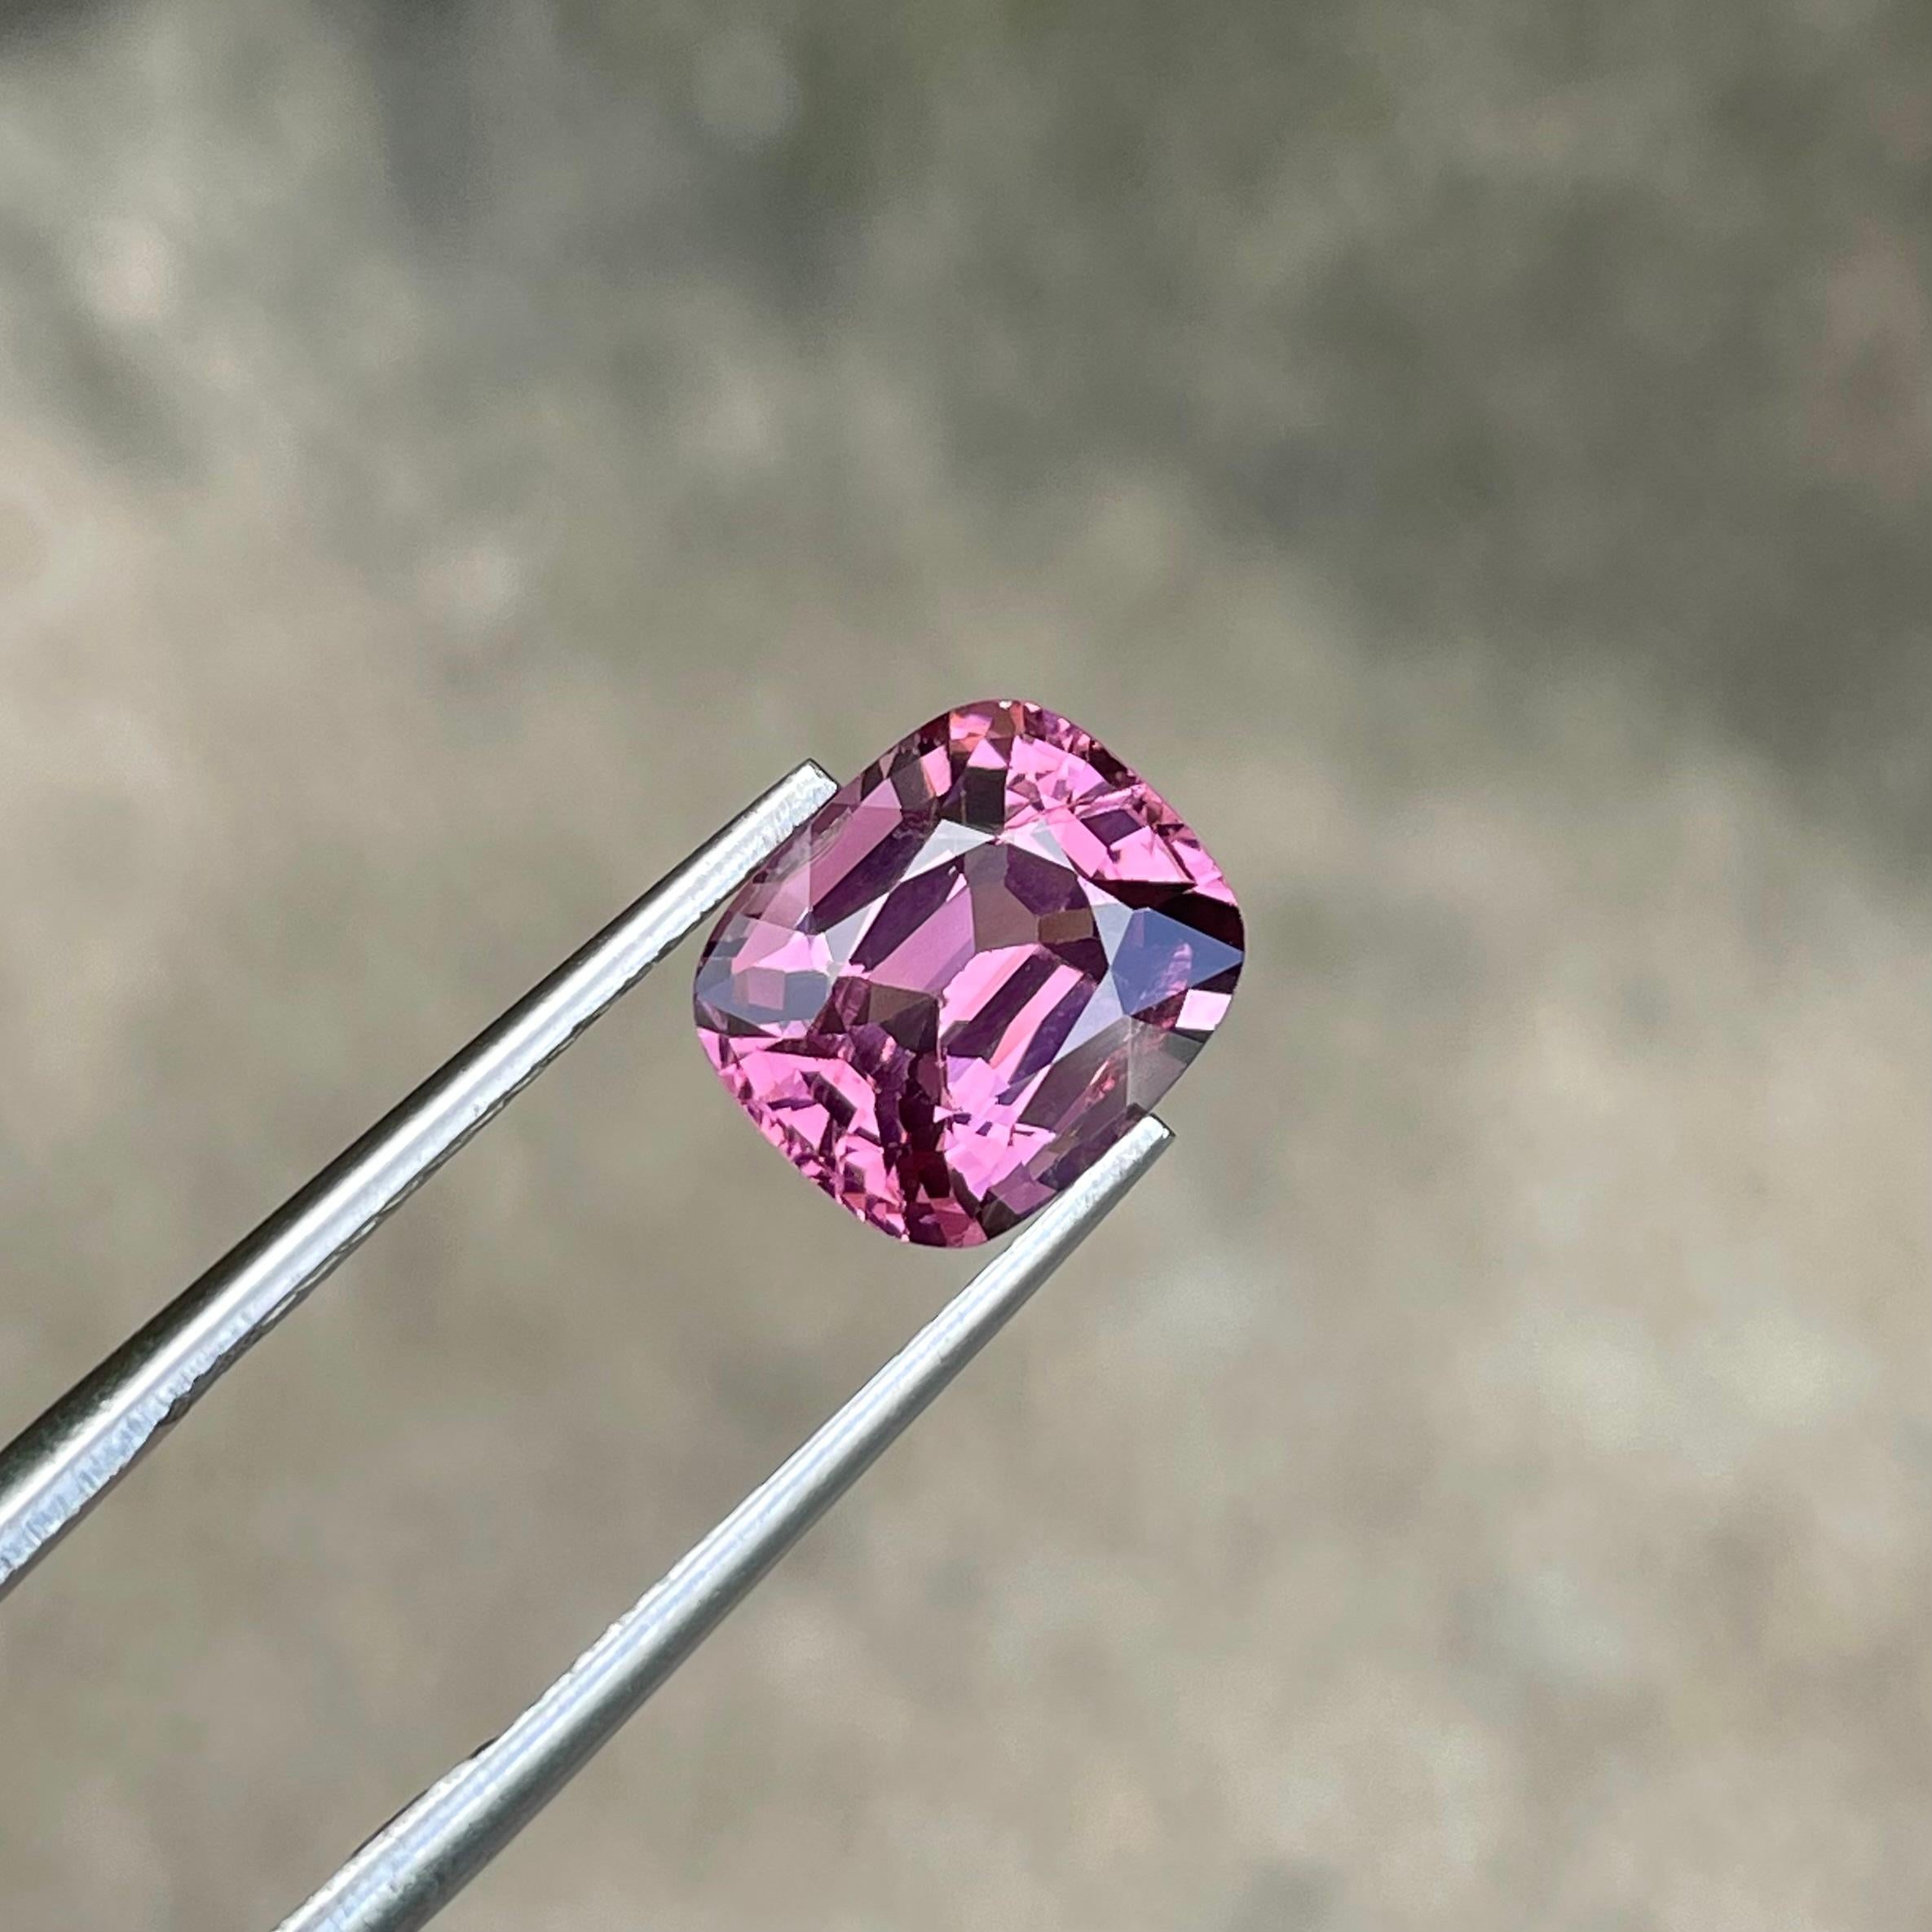 Weight : 3.75 carats 
Dimensions: 9.9x8.5x5.6 mm
Clarity : VVS (Very, Very Slightly Included)
Treatment : None
Origin : Afghanistan
Cut : Cushion
Shape : Step Cushion





Indulge in the enchanting allure of the Purplish Pink Burmese Spinel, a